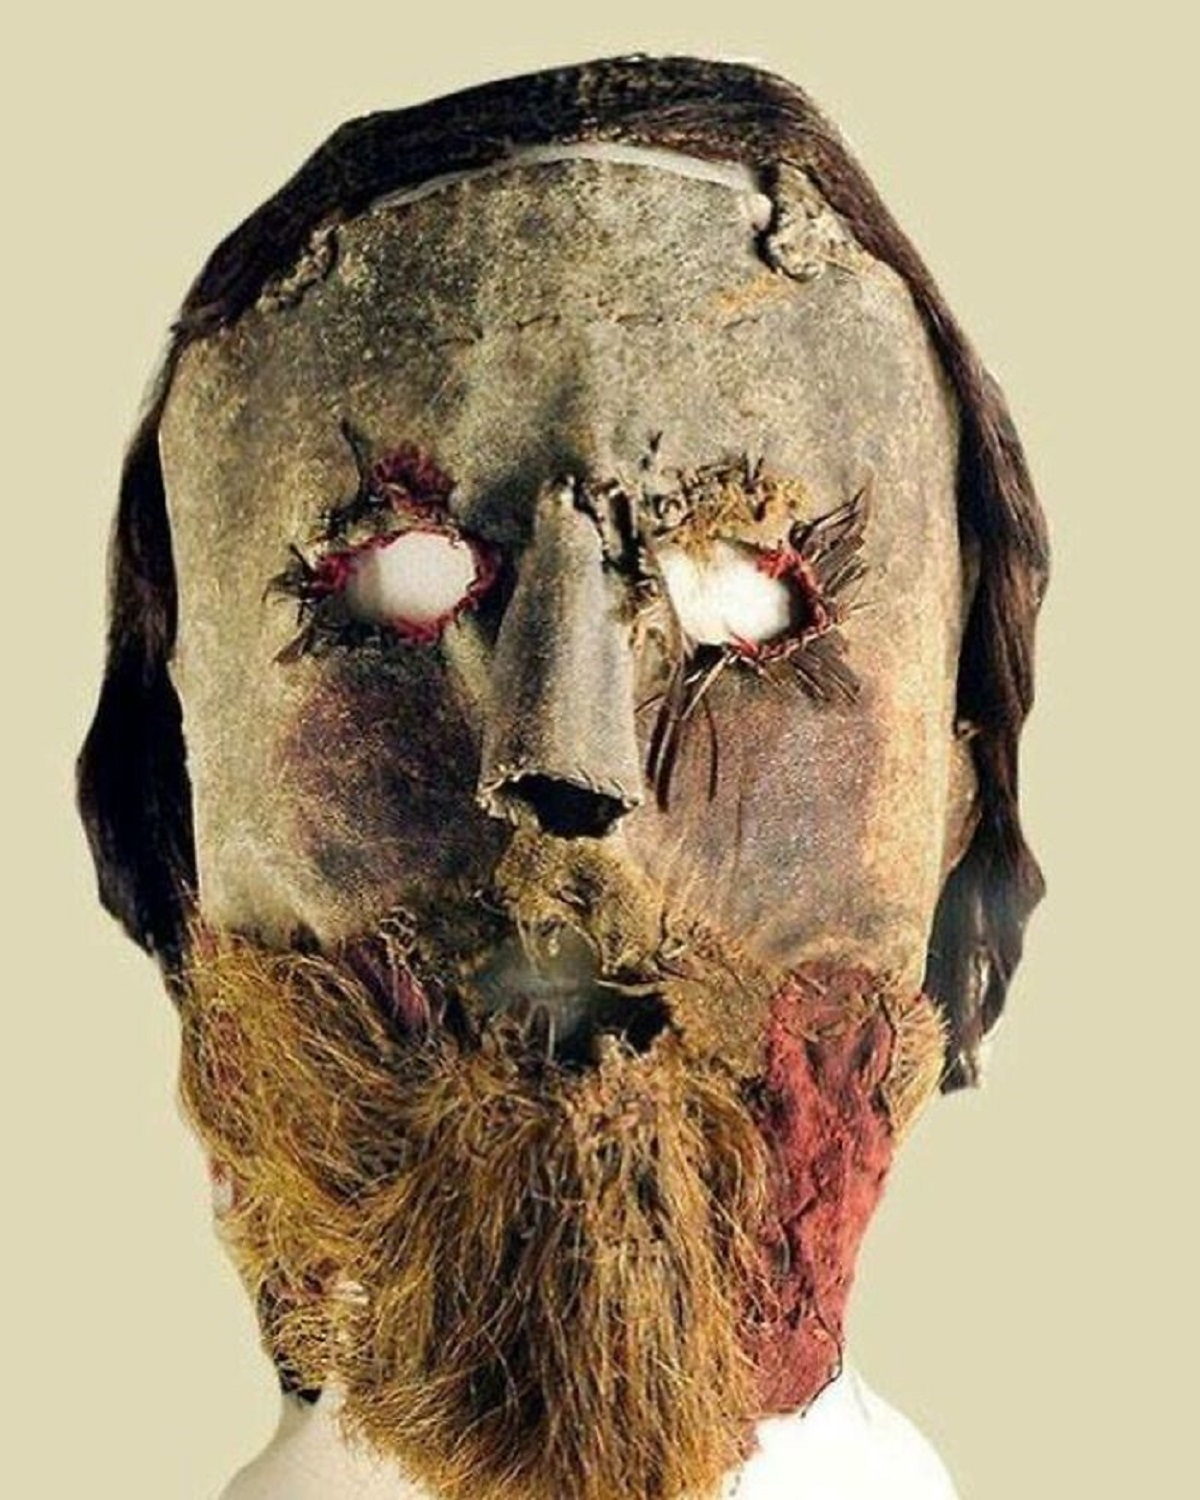 This Mask Could Come Straight From A Horror Film, Originally It Even Had False Teeth Stitched Into Its Mouth. It Is Made Of Leather, With Real Teeth Fixed In The Mouth And Human Hair Attached To The Forehead